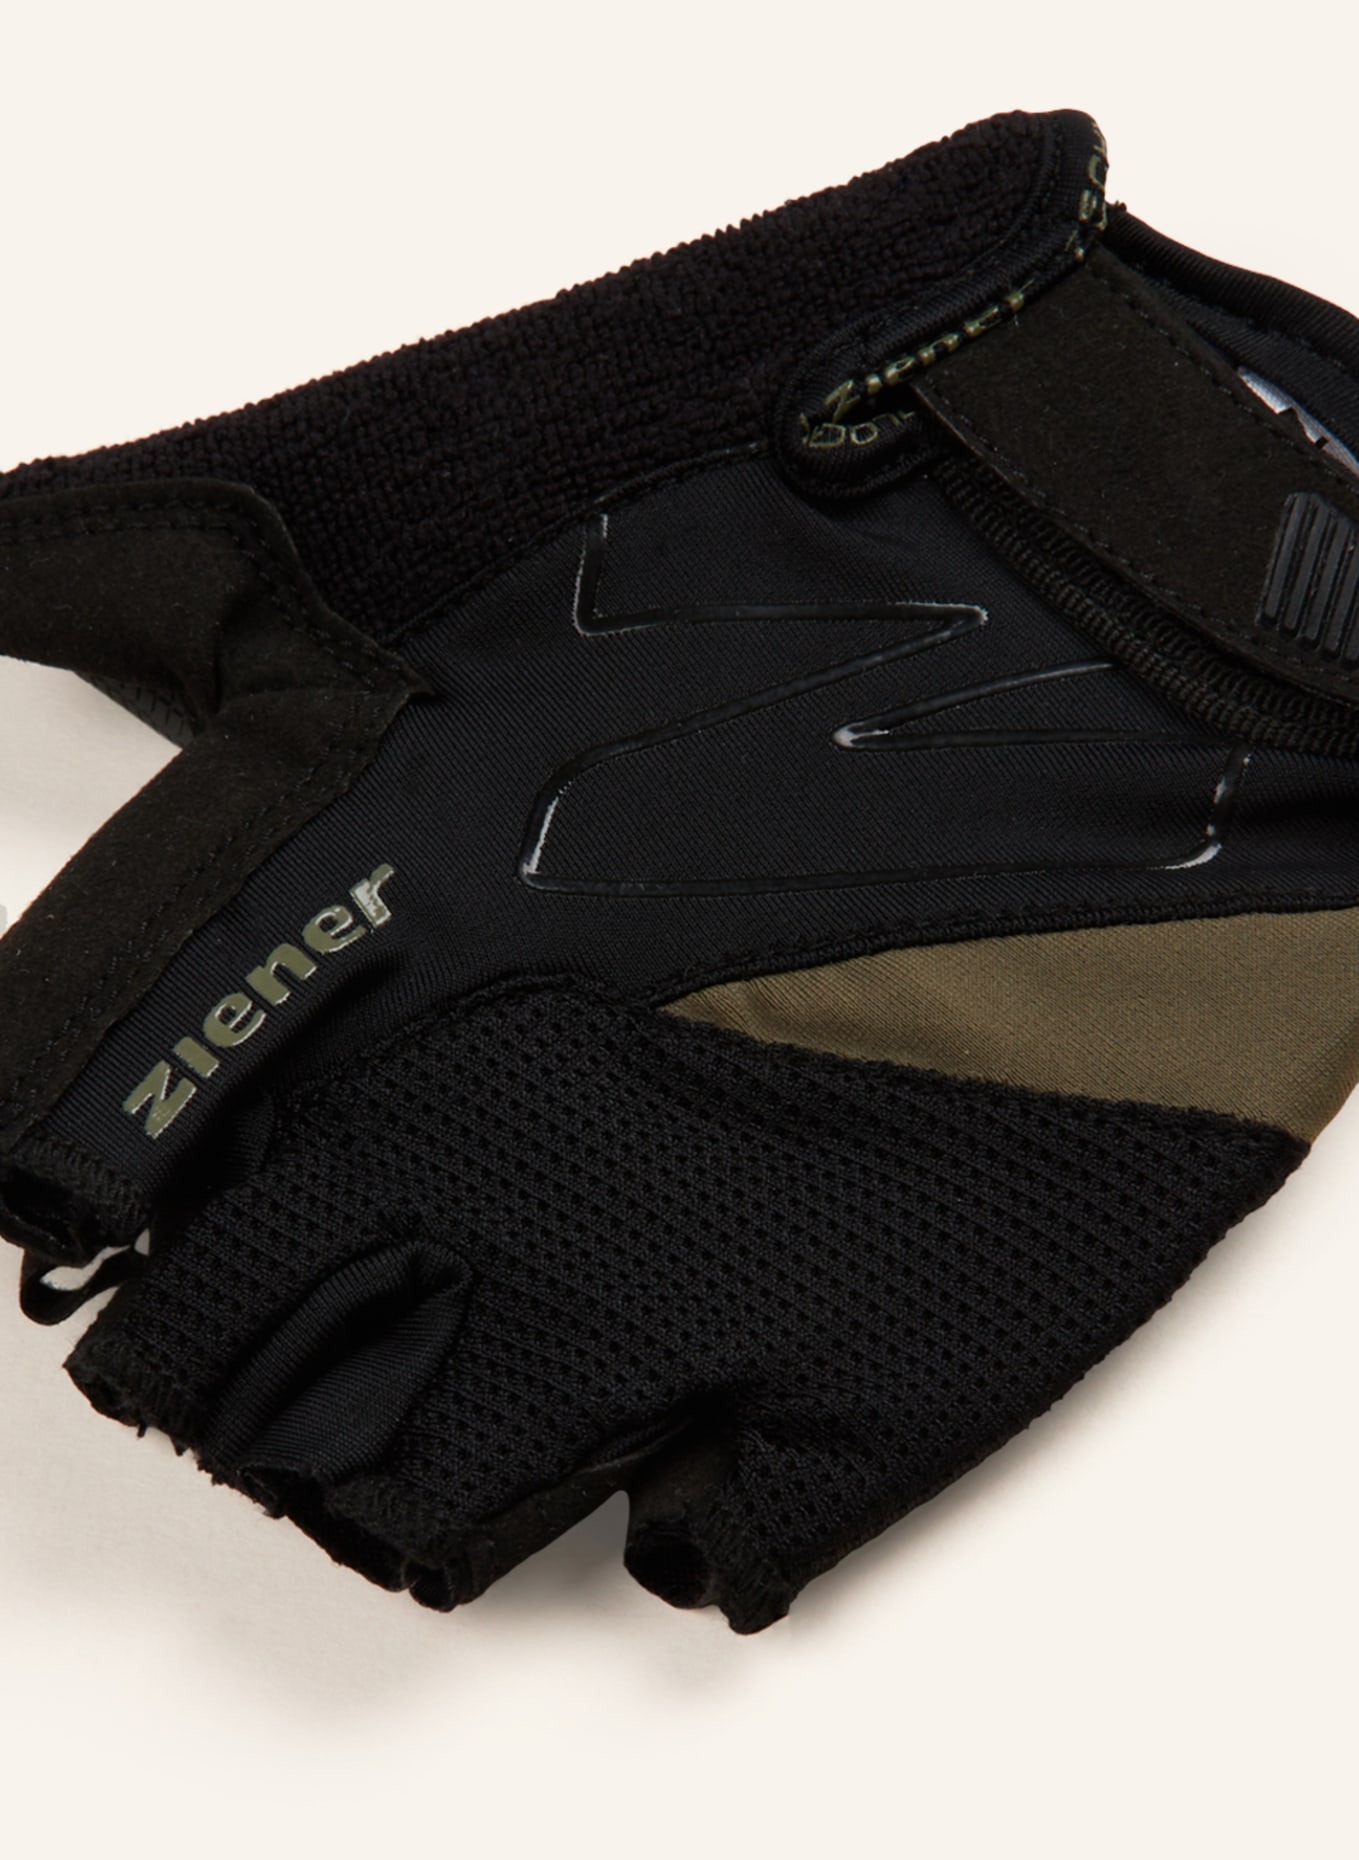 CRAVE ziener gloves khaki black/ in Cycling